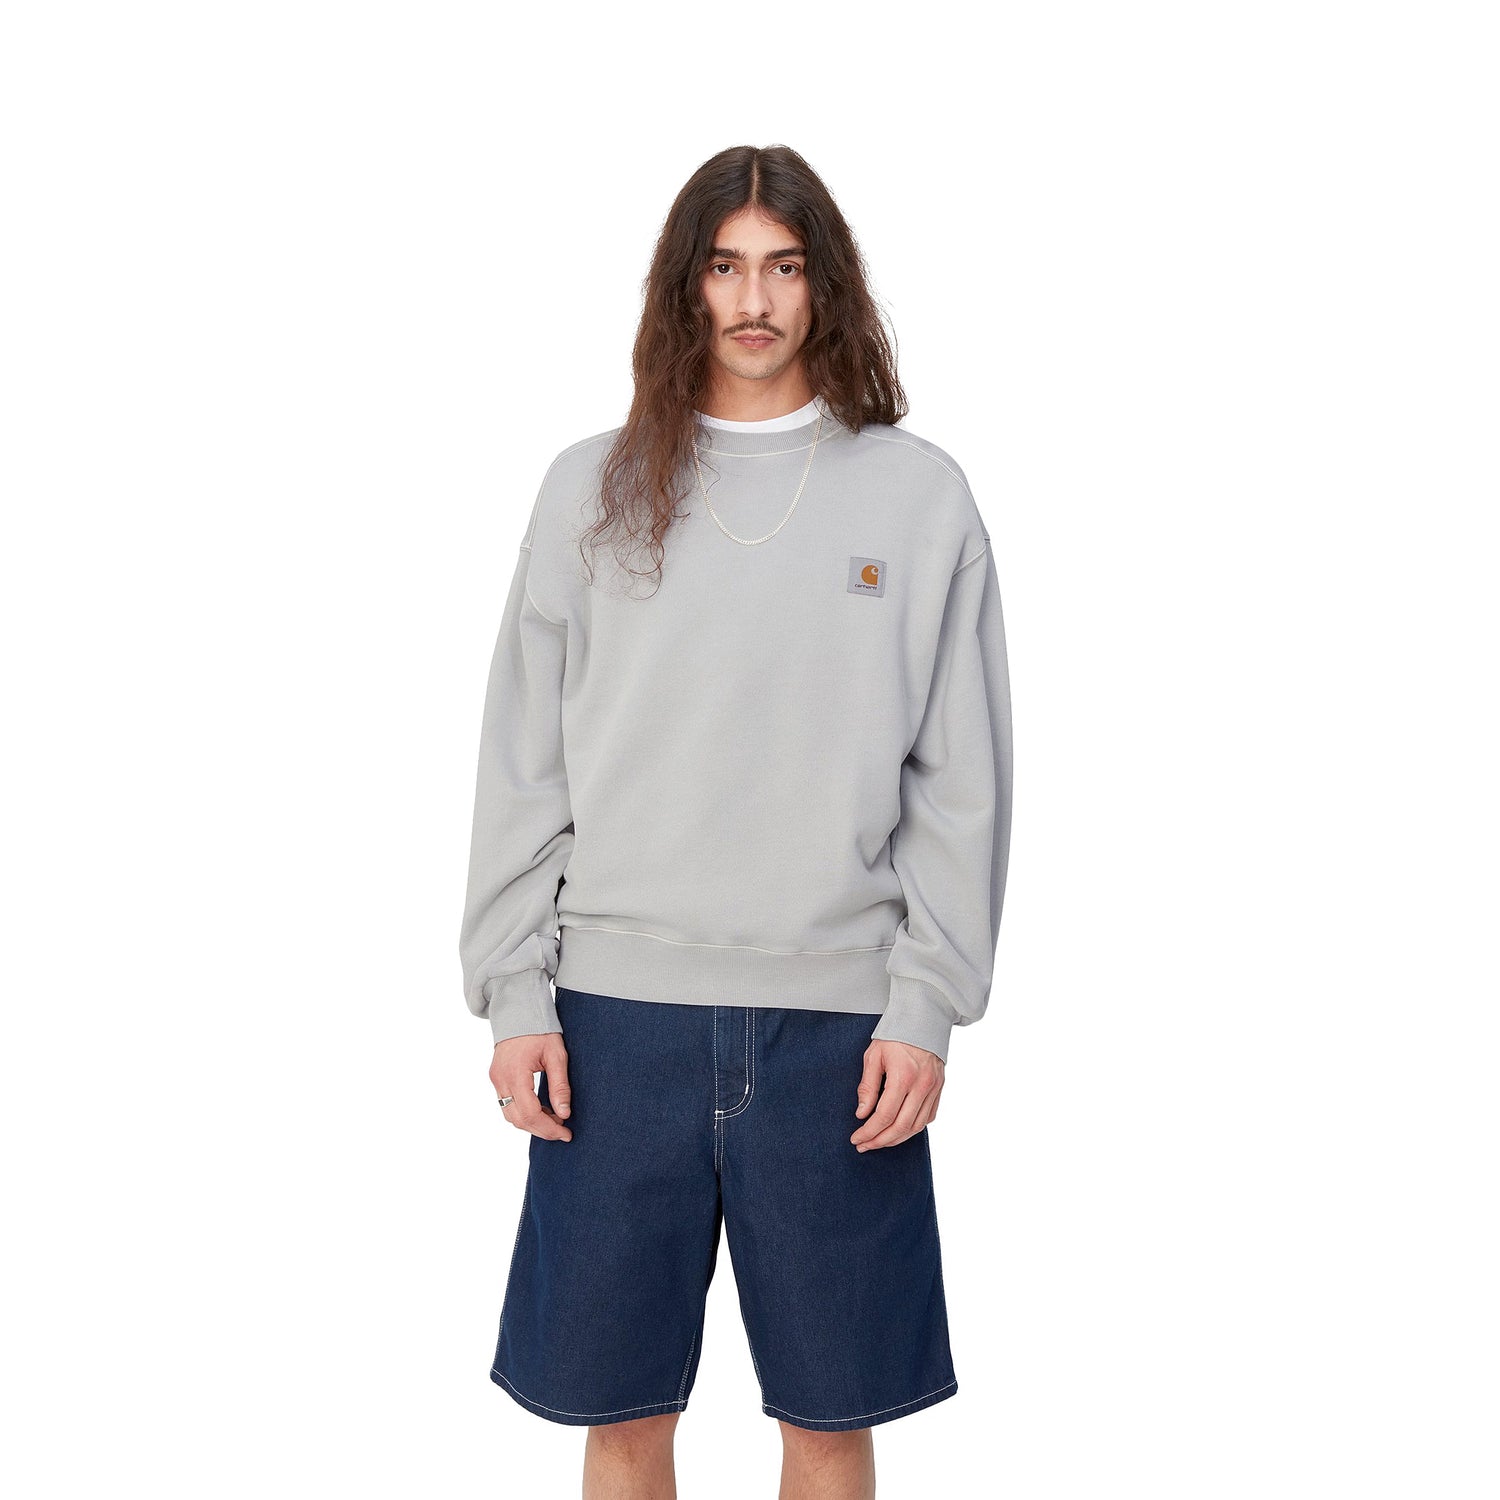 NELSON SWEAT SONIC SILVER GARMENT DYED